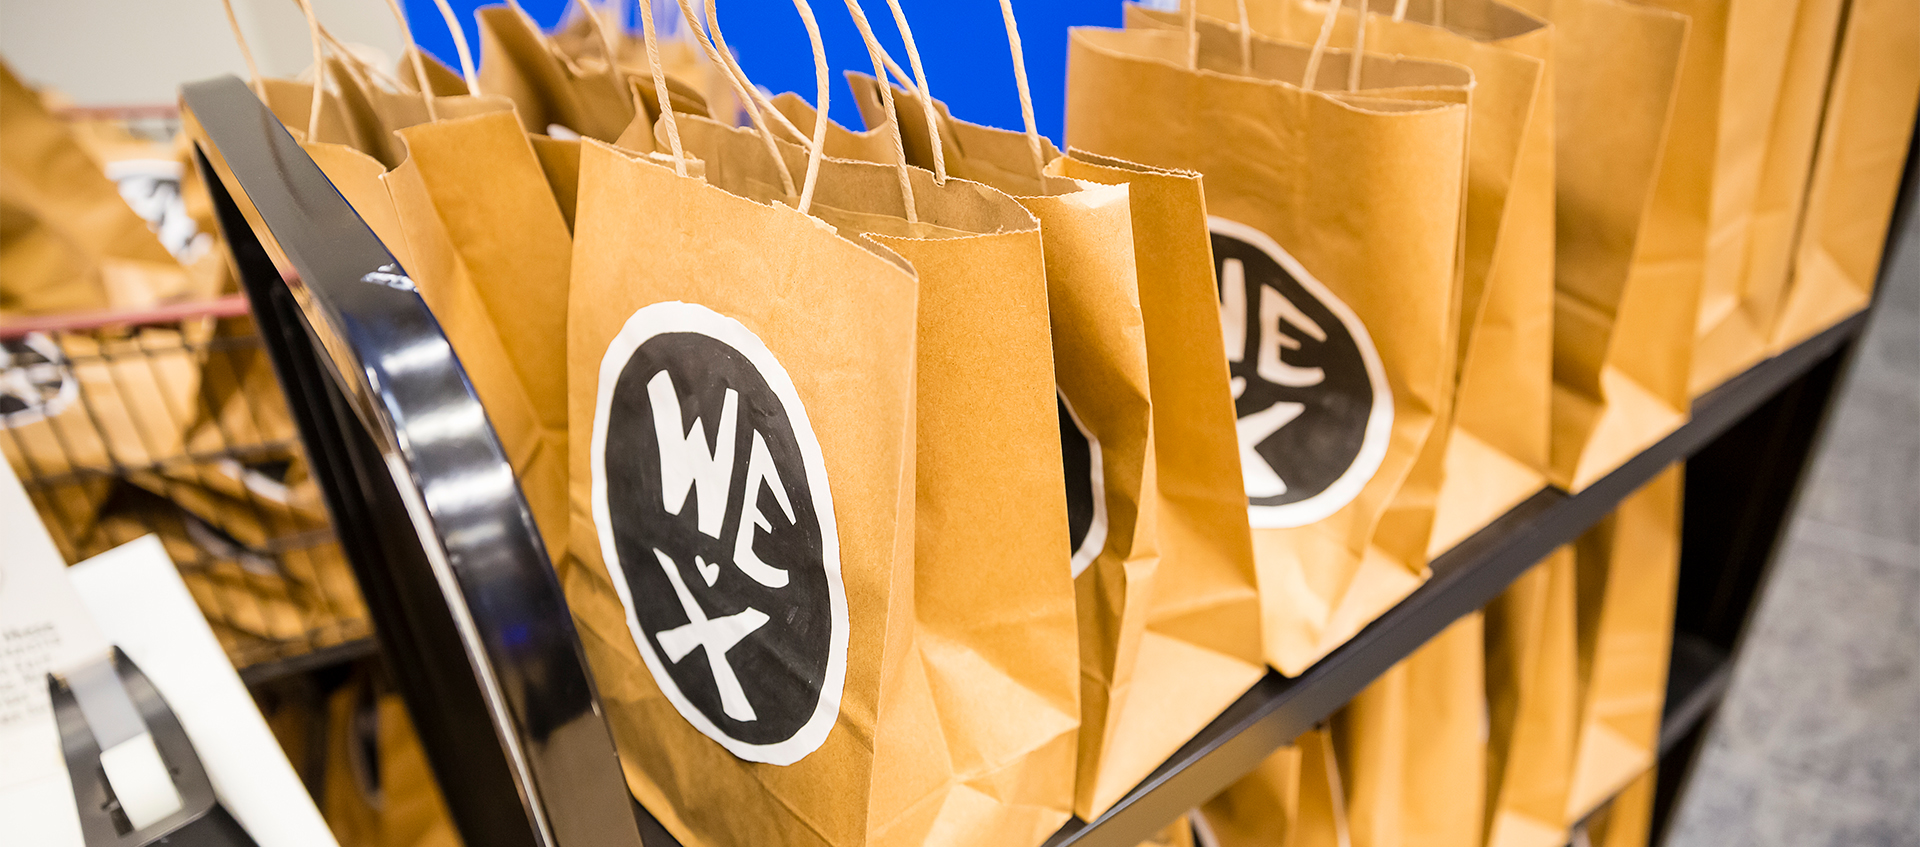 A cart of paper activity bags with a hand-drawn Wex logo await families at the center